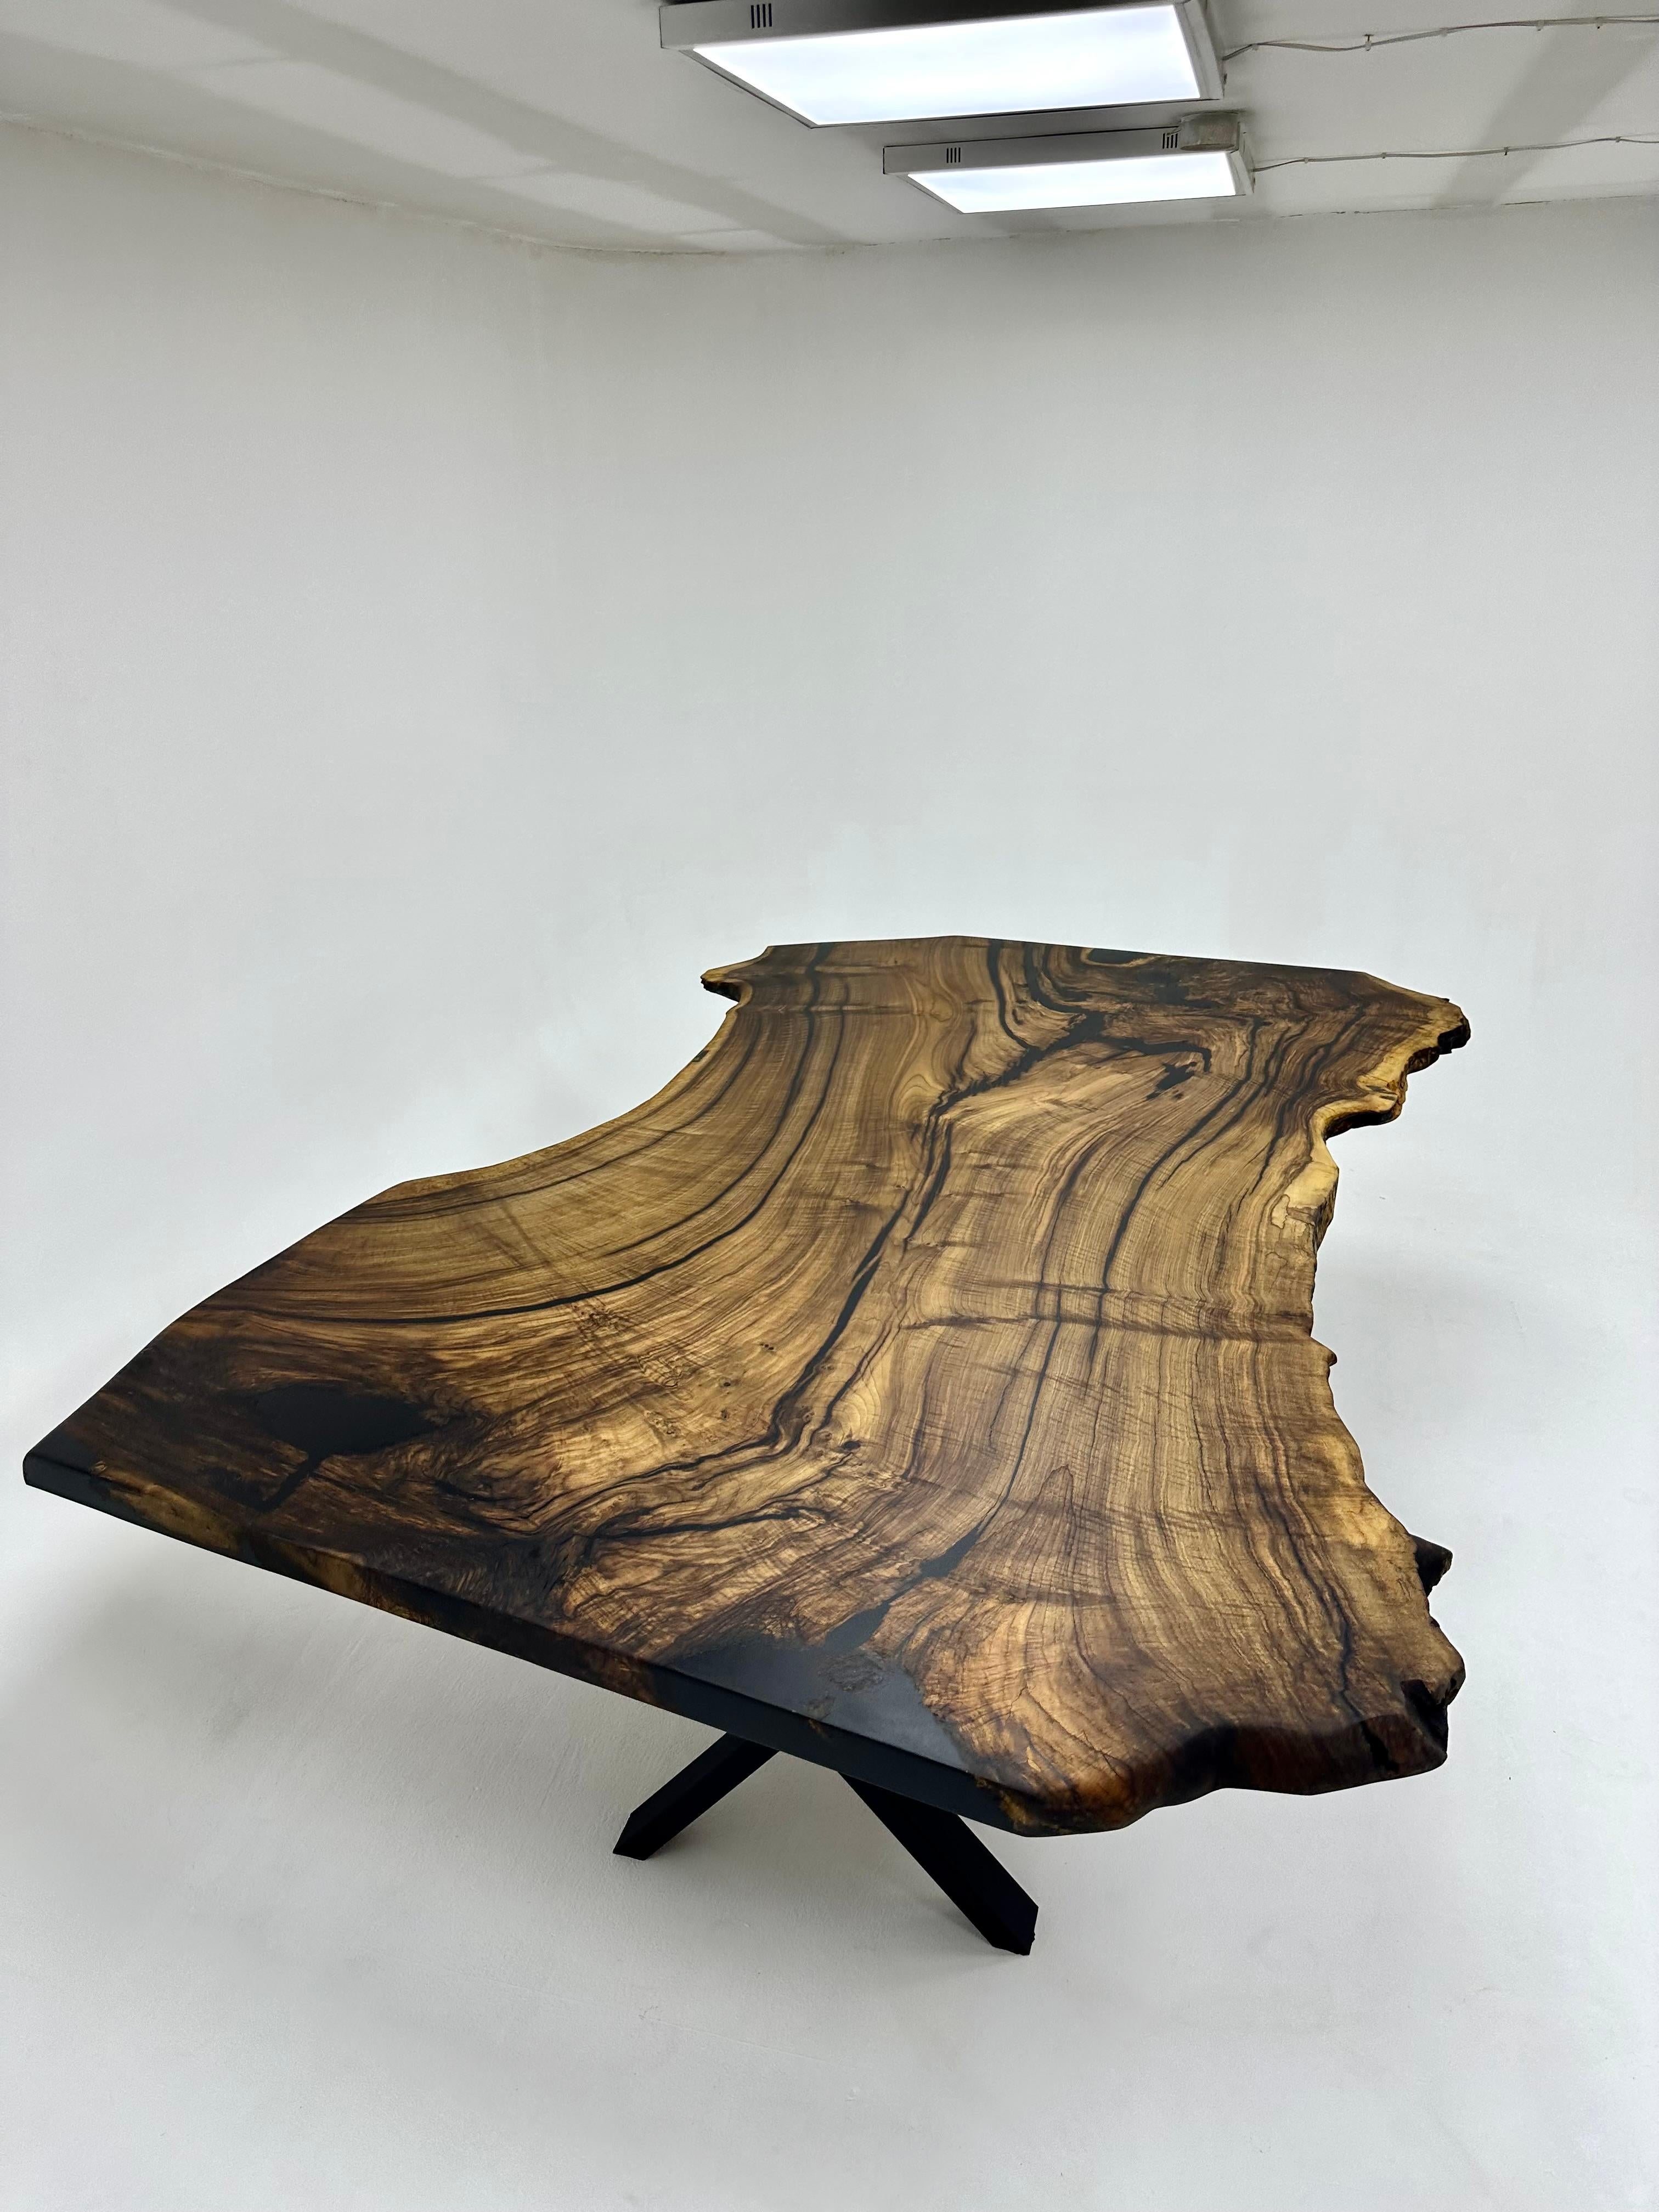 LIVE EDGE WALNUT CONFERENCE TABLE

This table is made of natural walnut slabs. 

Some Walnut slabs have a lot of natural beauty as it’s one side has a large curve. This is one of them! 

We've filled the cracks with black epoxy, without disrupting